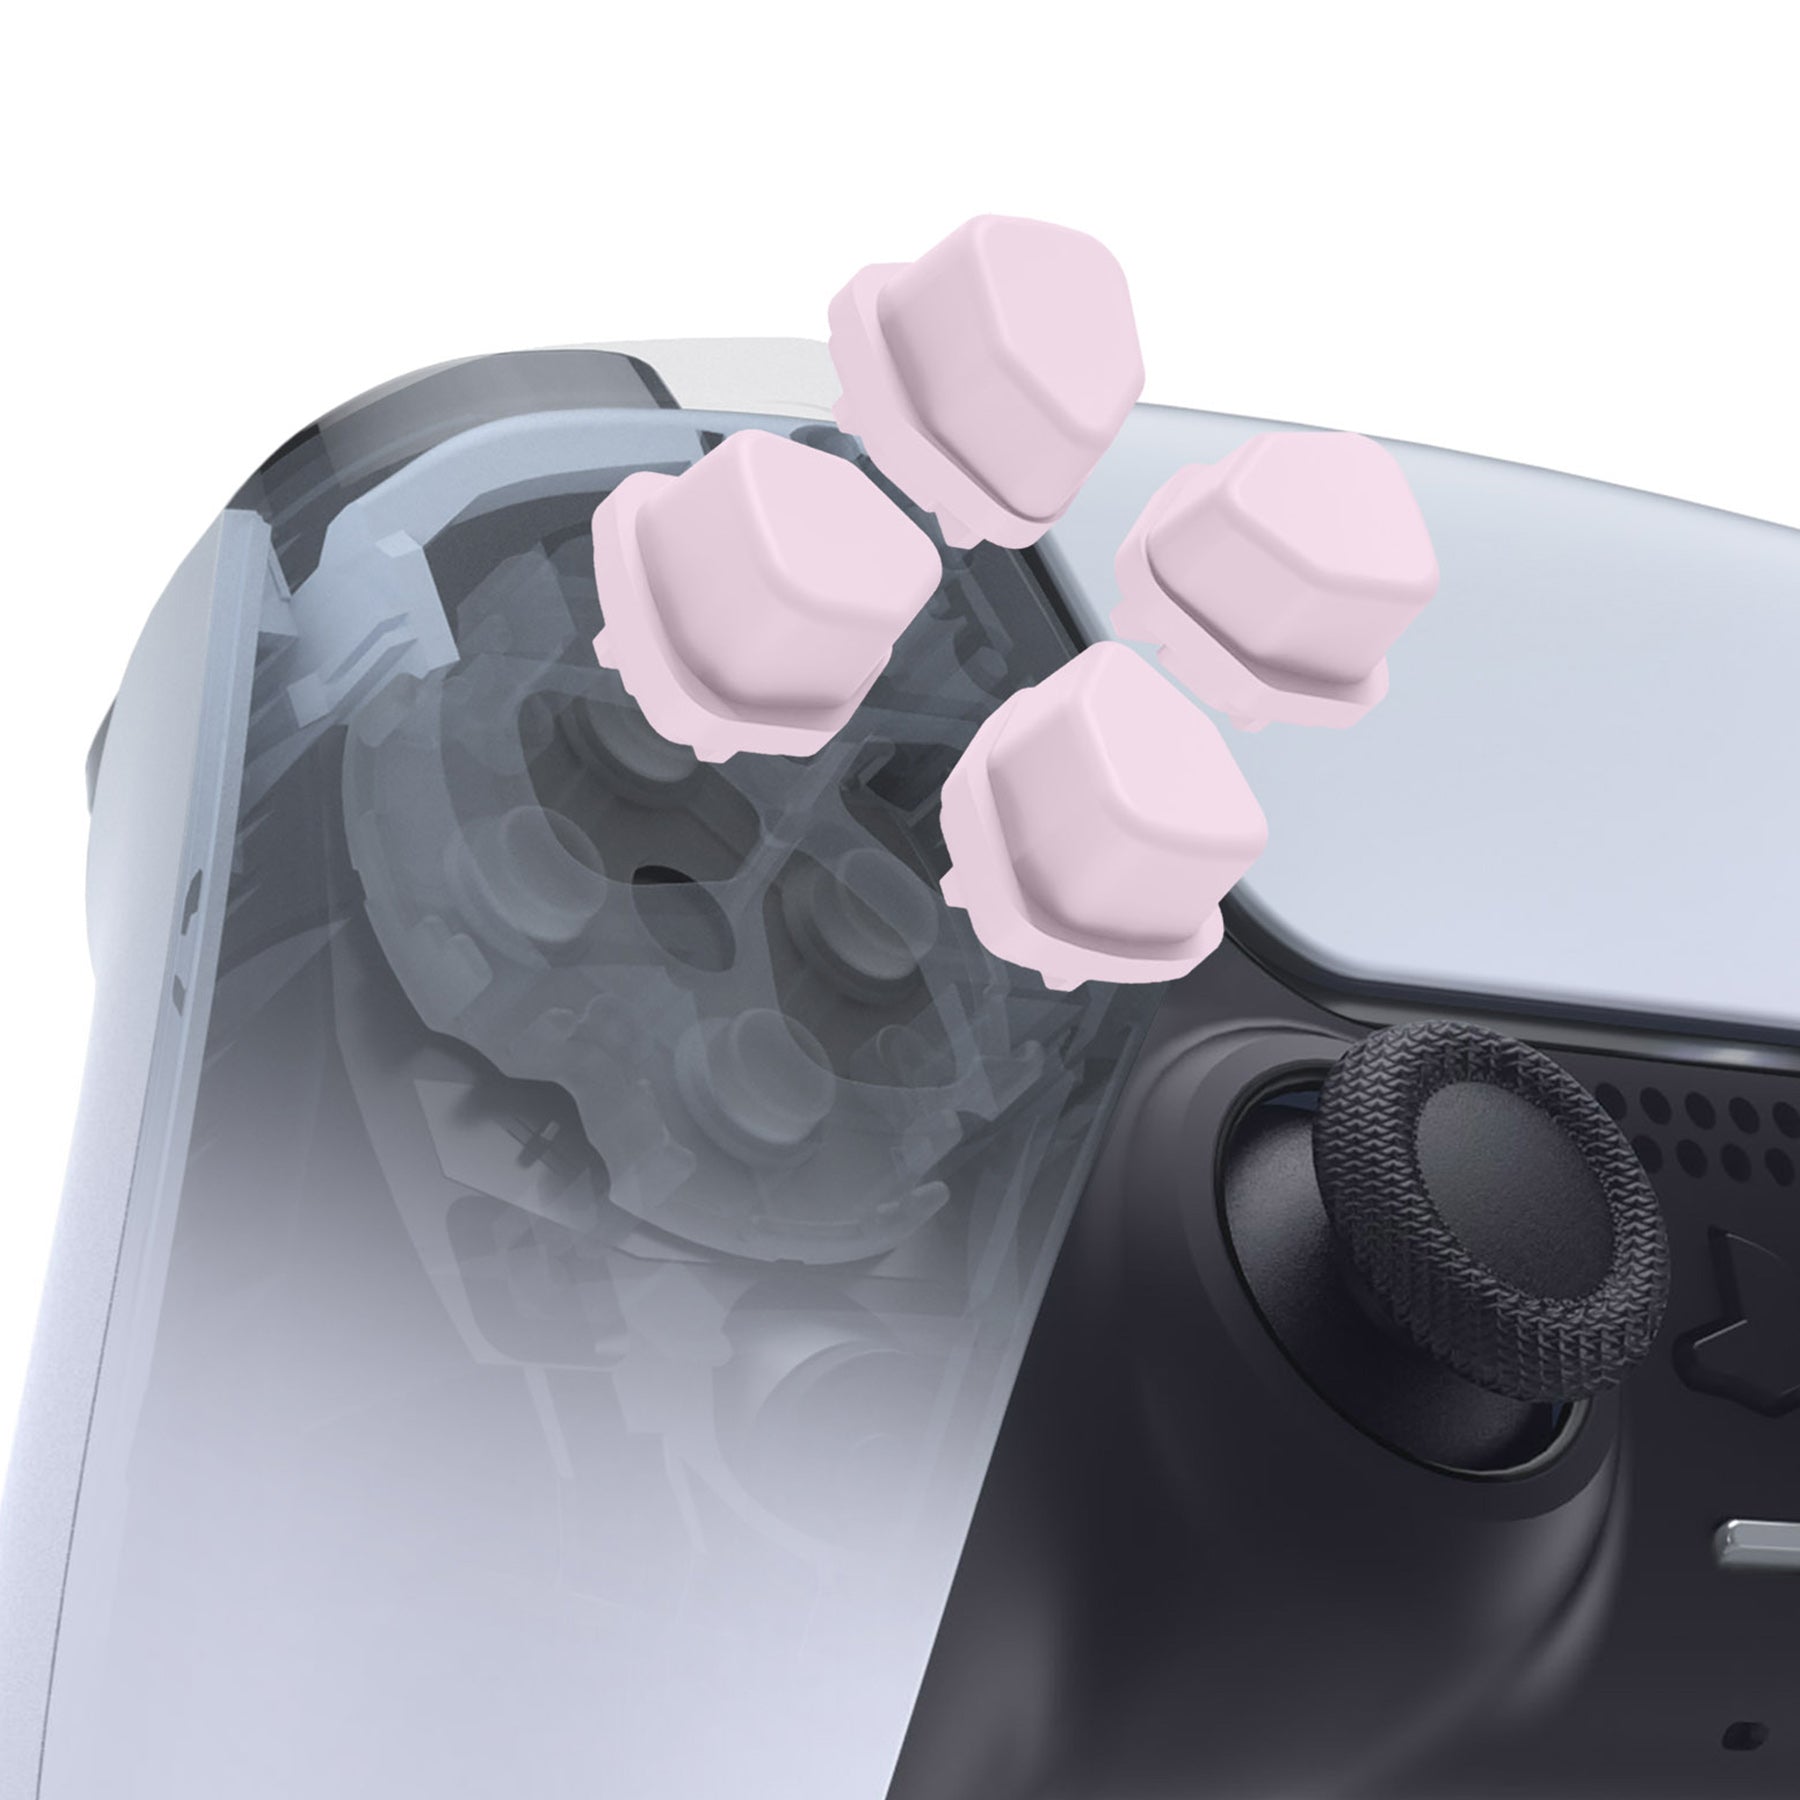 eXtremeRate Retail Ergonomic Split Dpad Buttons (SDP Buttons) for ps5 Controller, Cherry Blossoms Pink Independent Dpad Direction Buttons for ps5, for ps4 All Model Controller - JPF8012